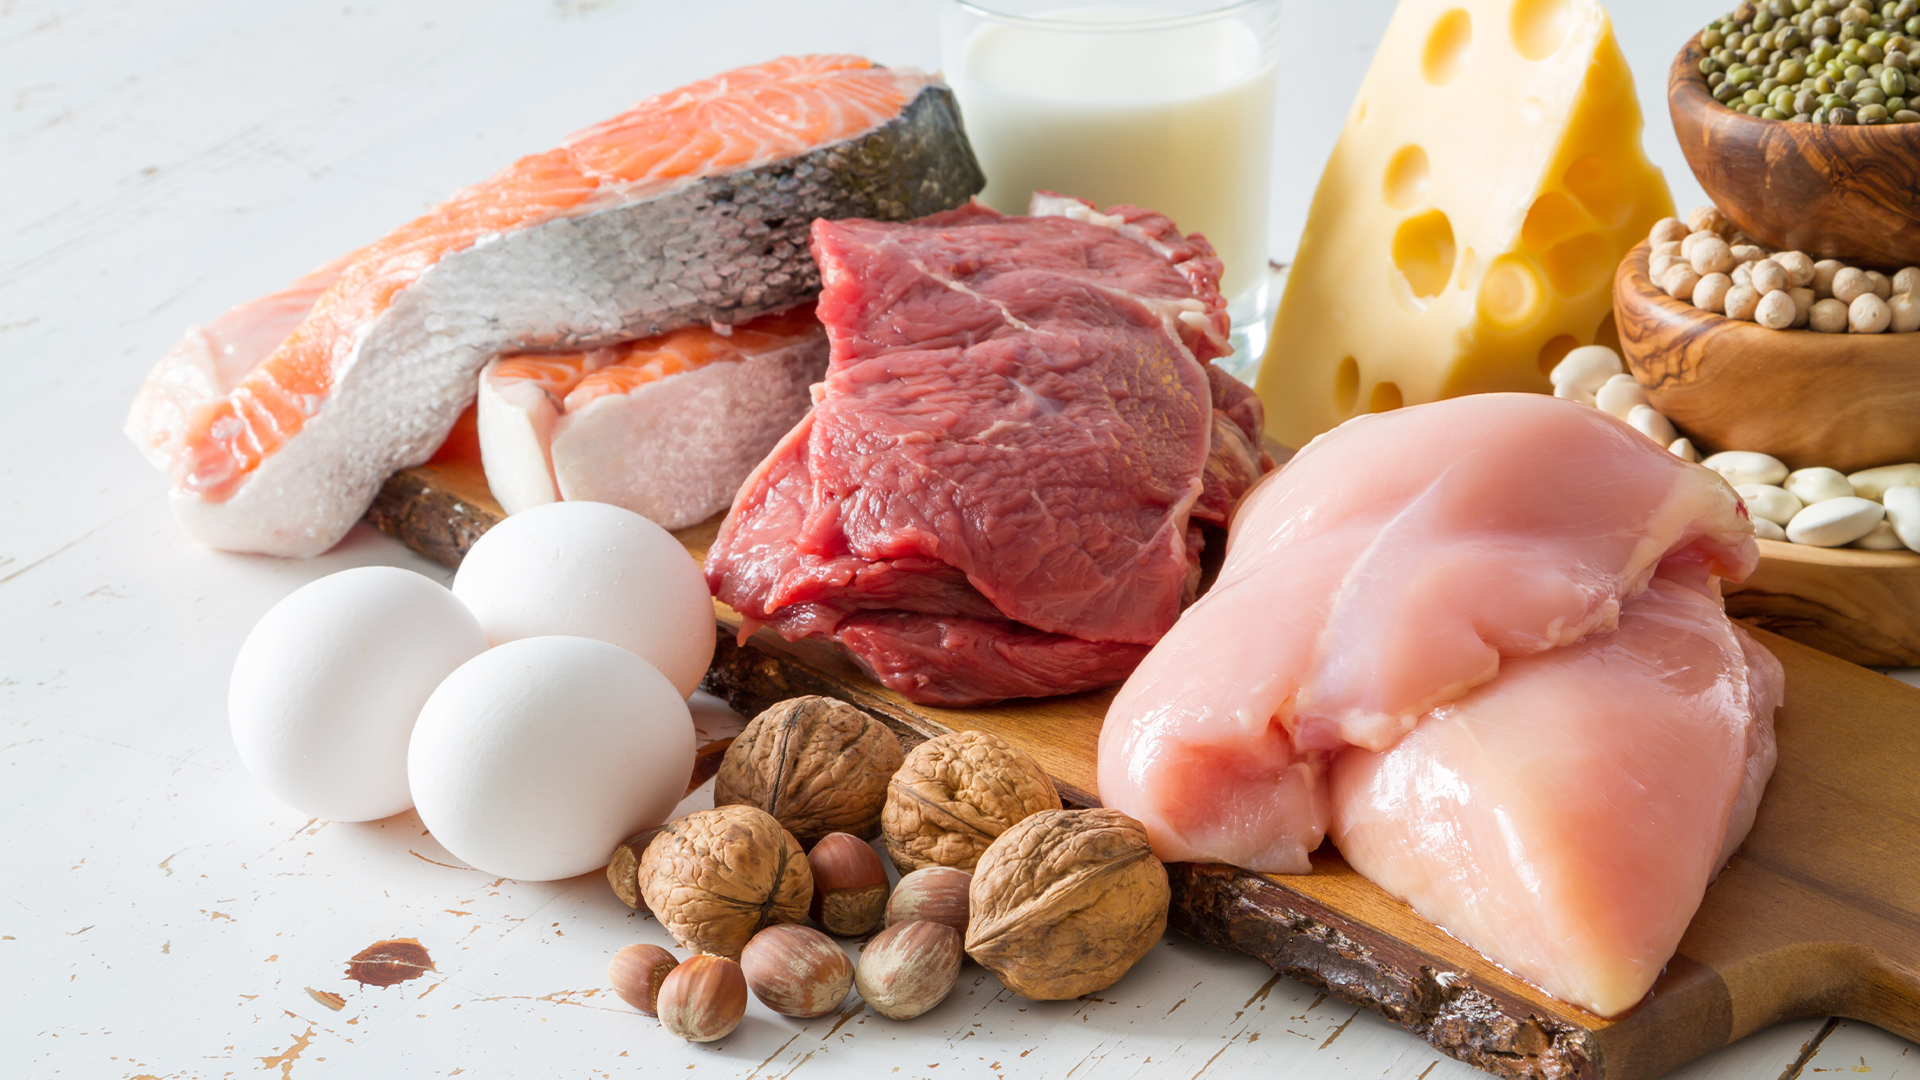 Can you eat too much protein?